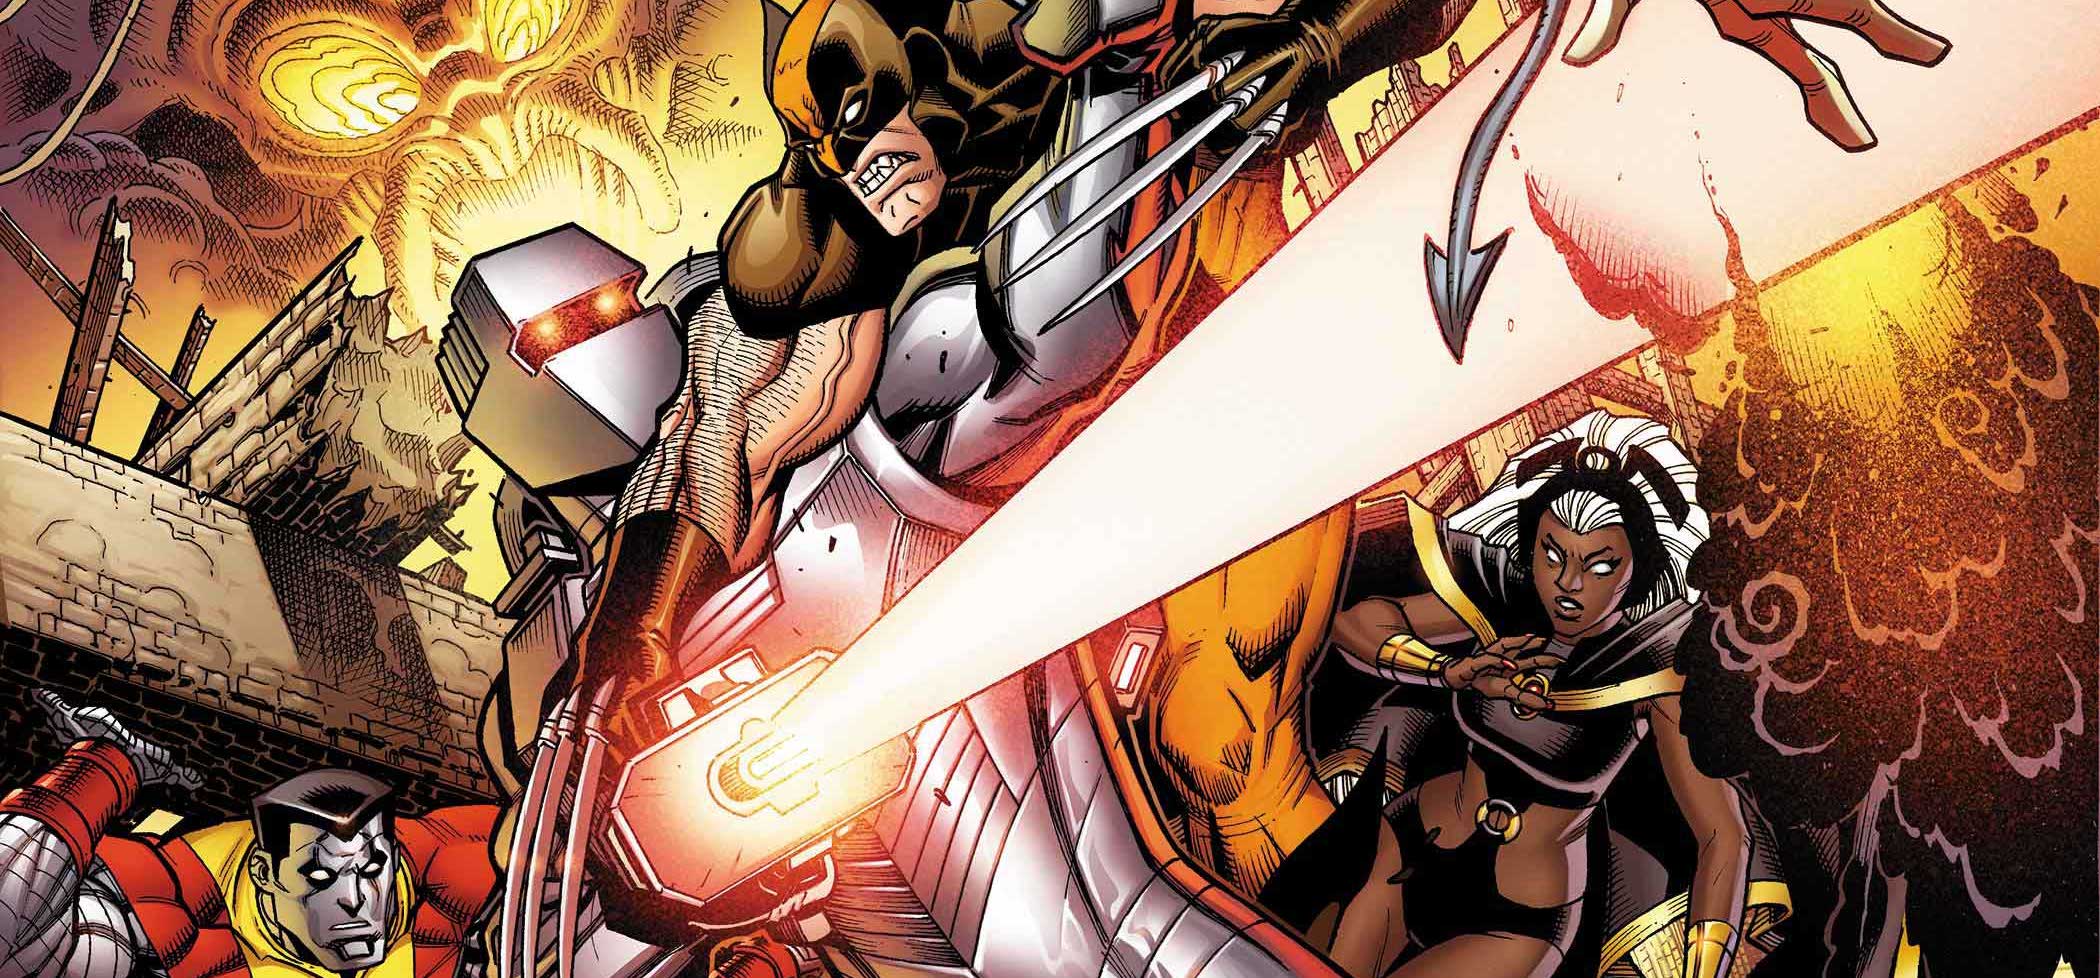 'ROM and the X-men: Marvel Tales' #1 brings back classic adventure